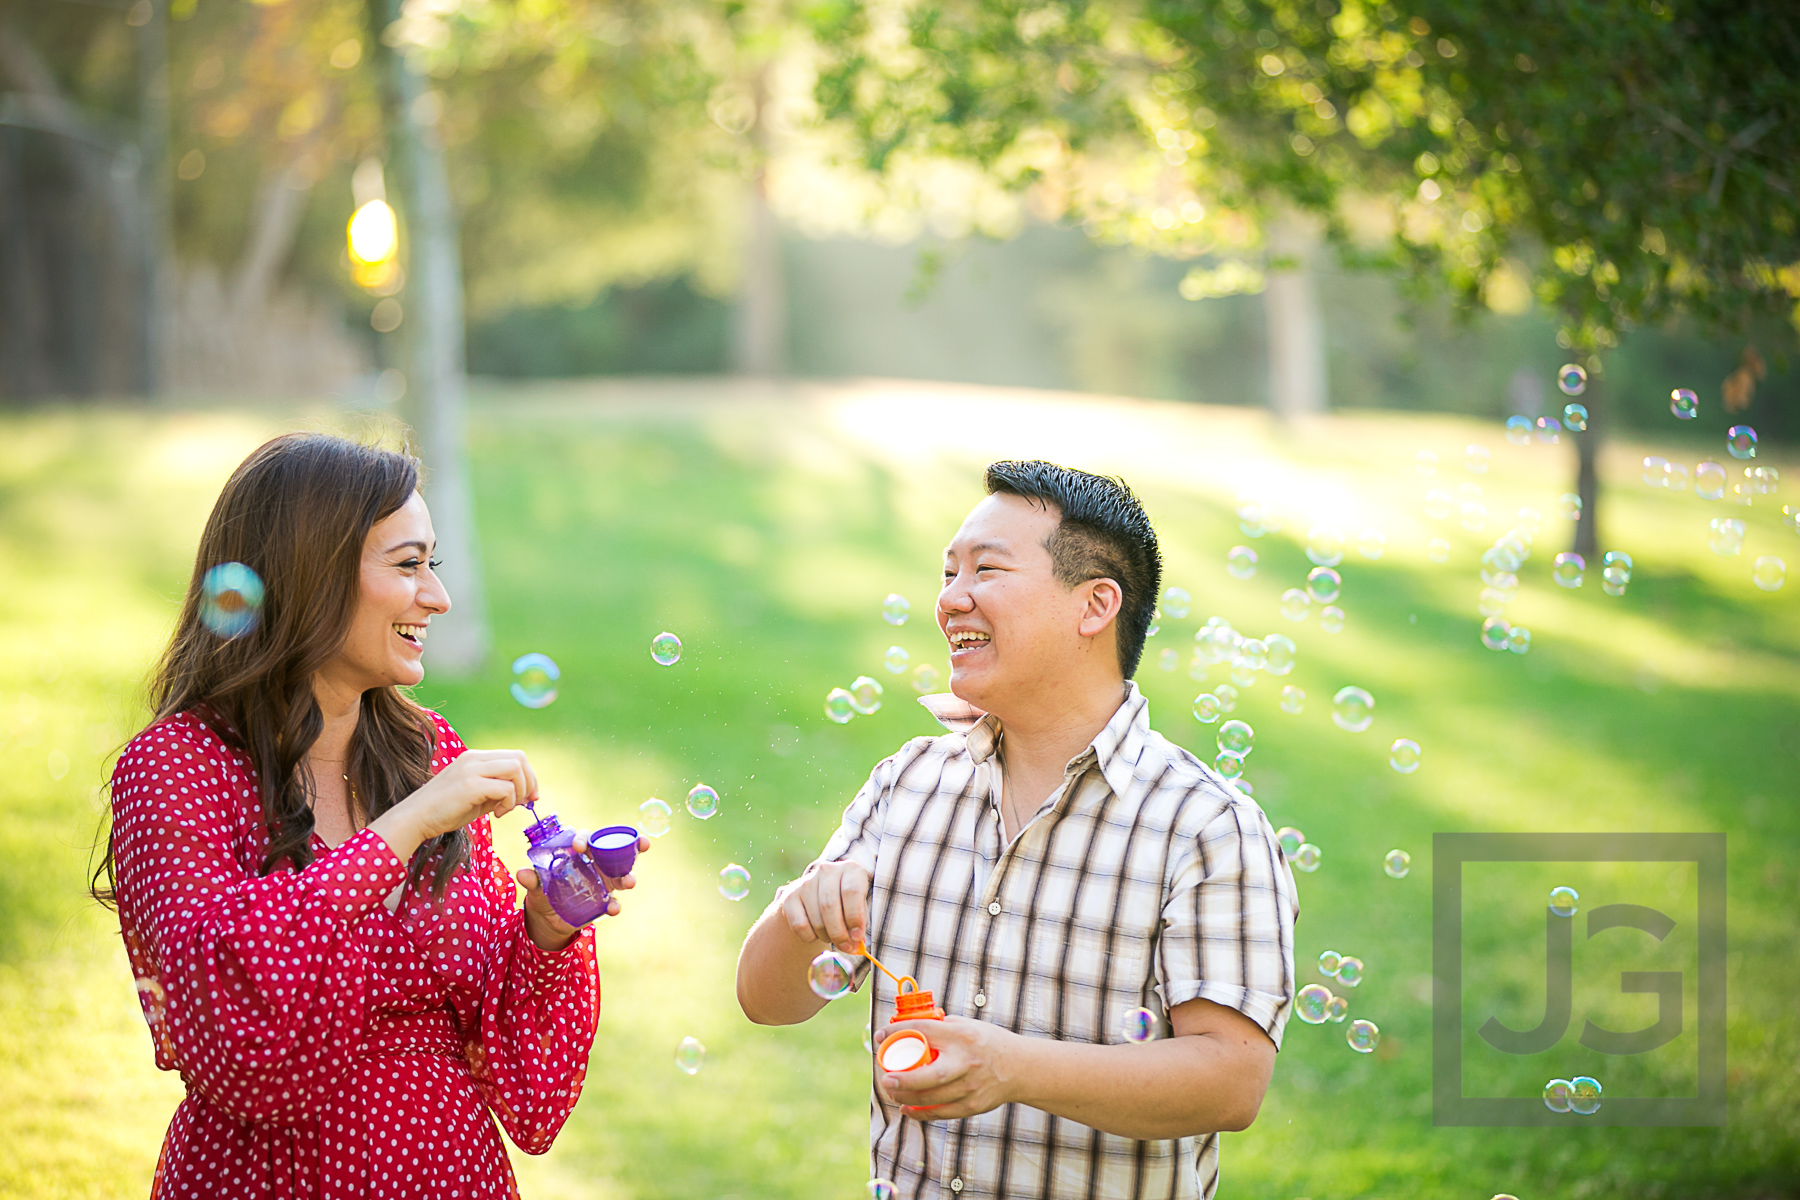 Engagement Photography with Bubbles